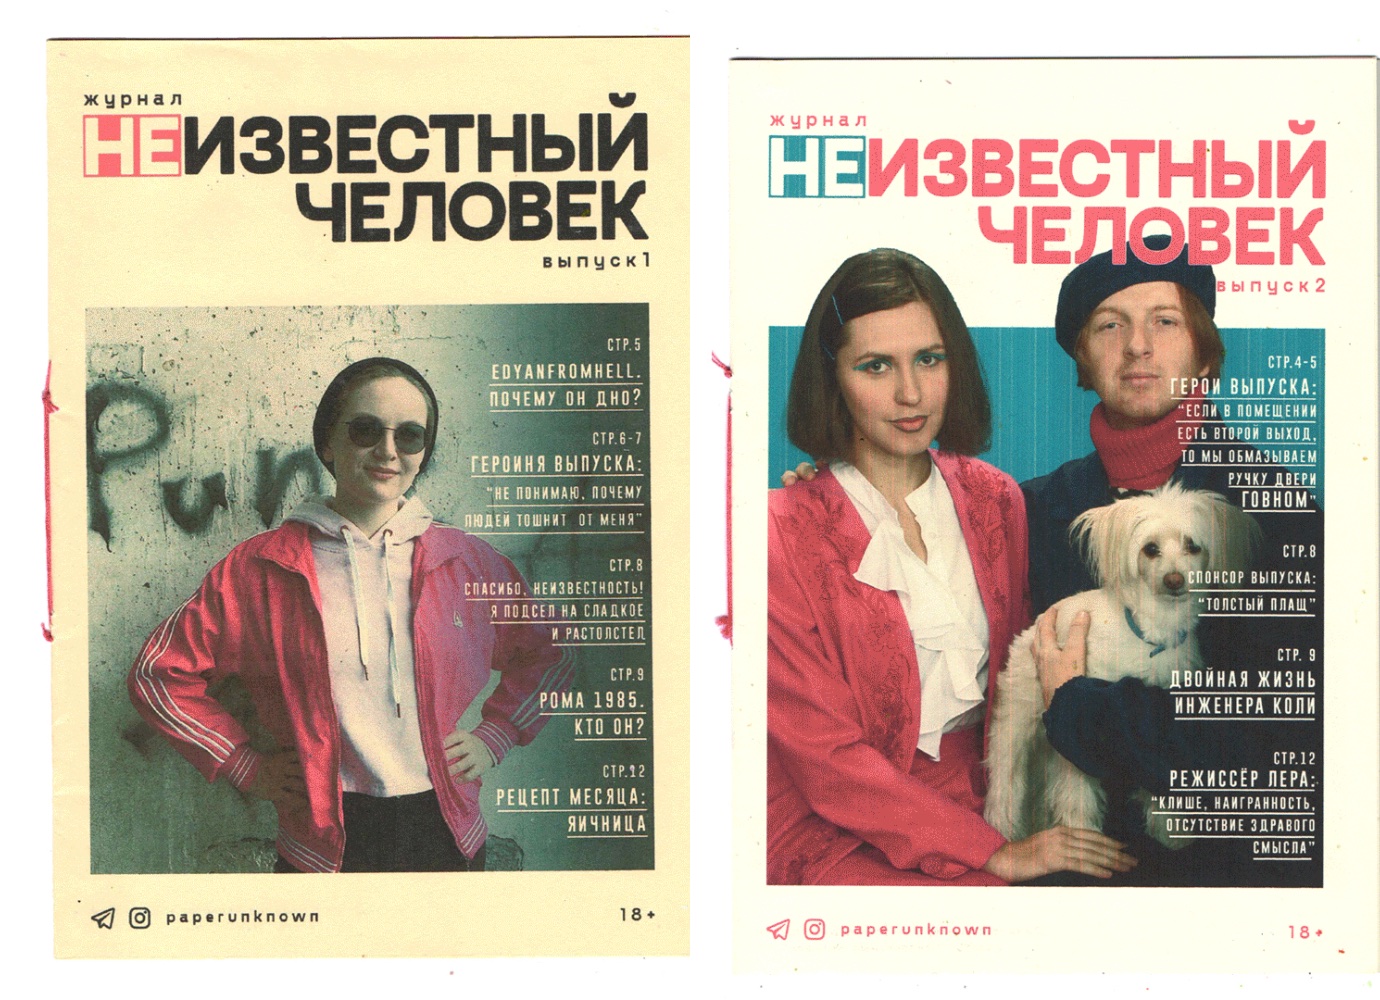 This zine gives Russia’s unsung artists the A-List attention they deserve 